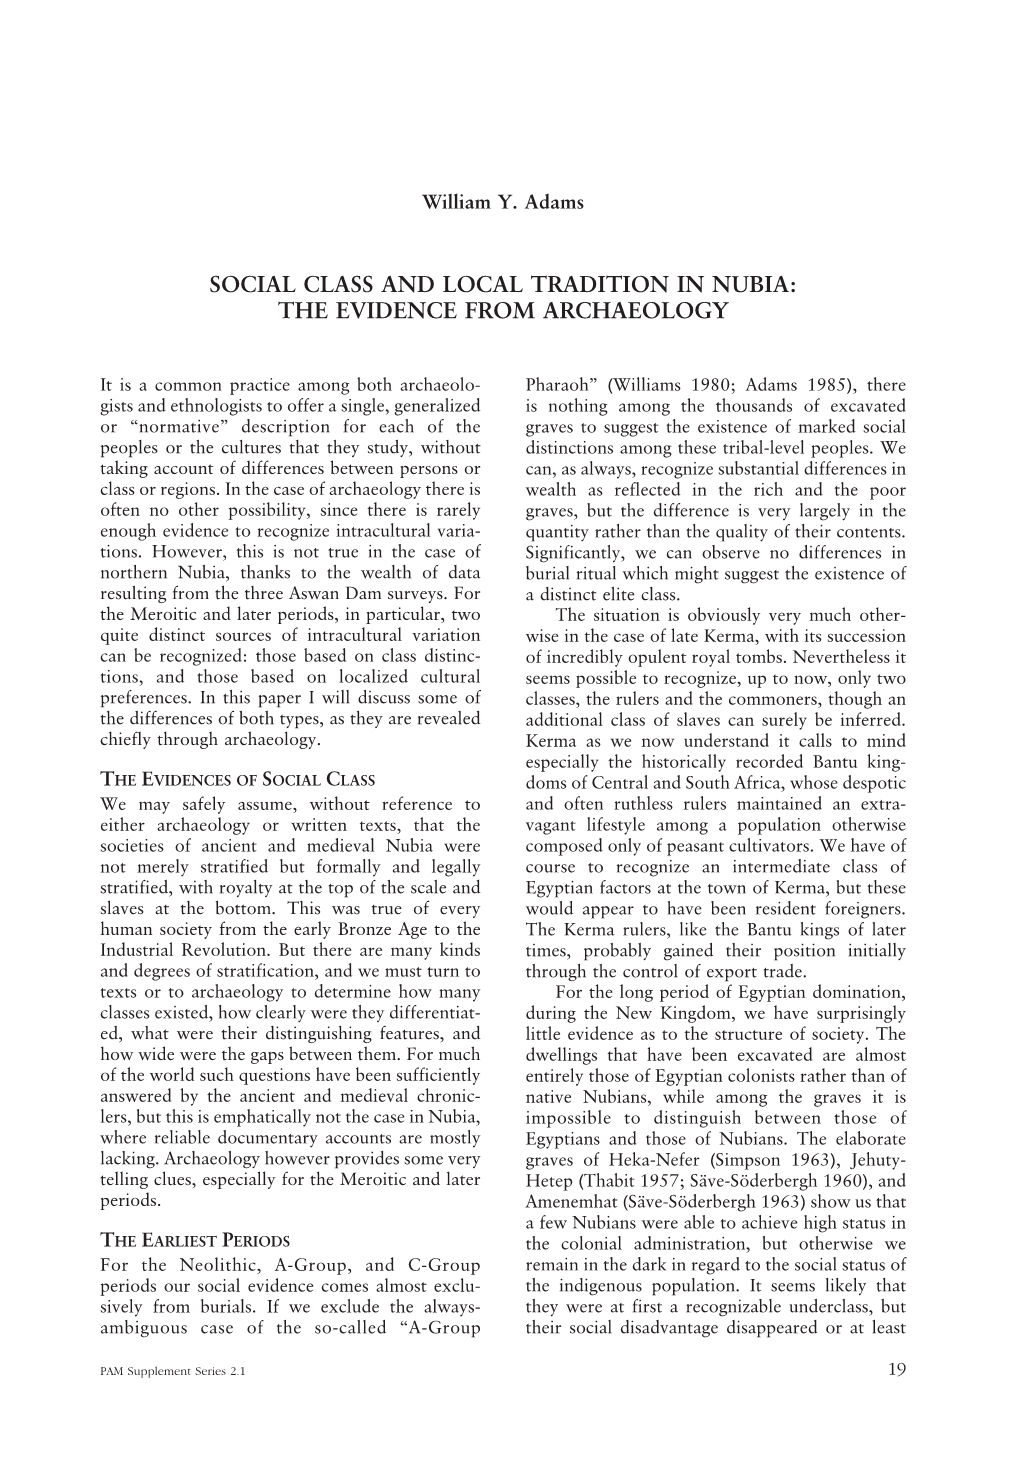 Social Class and Local Tradition in Nubia: the Evidence from Archaeology